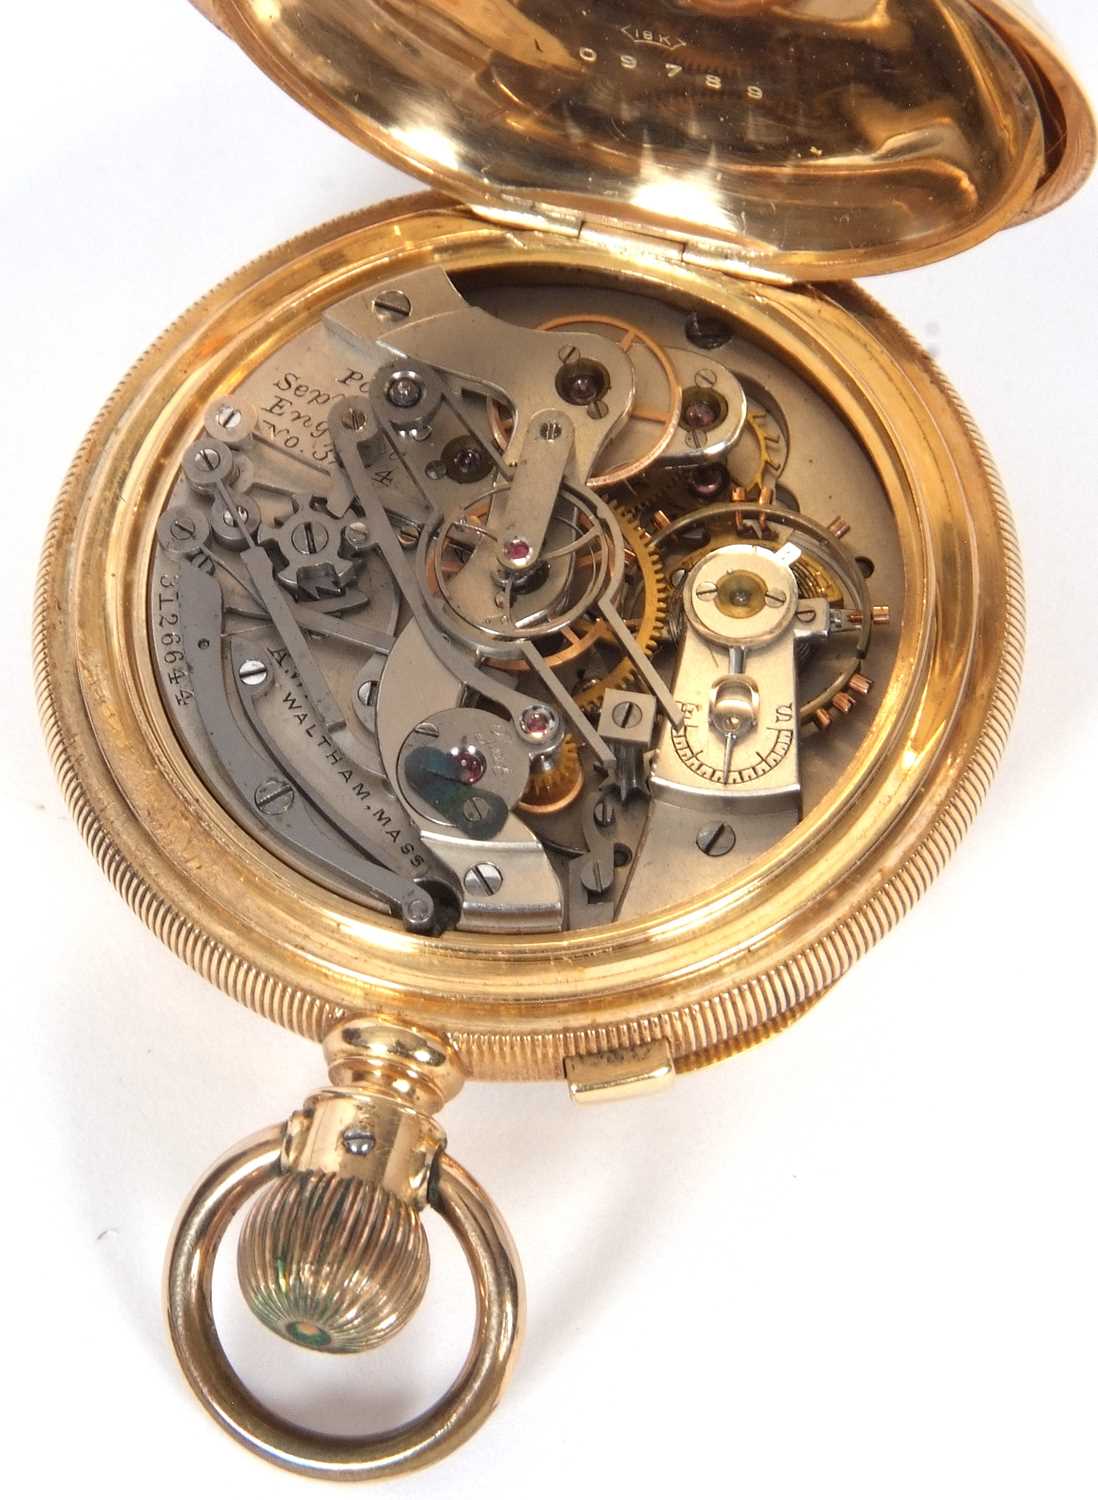 Waltham yellow metal chronograph pocket watch stamped 18k in the case back, it has a white enamel - Image 7 of 7